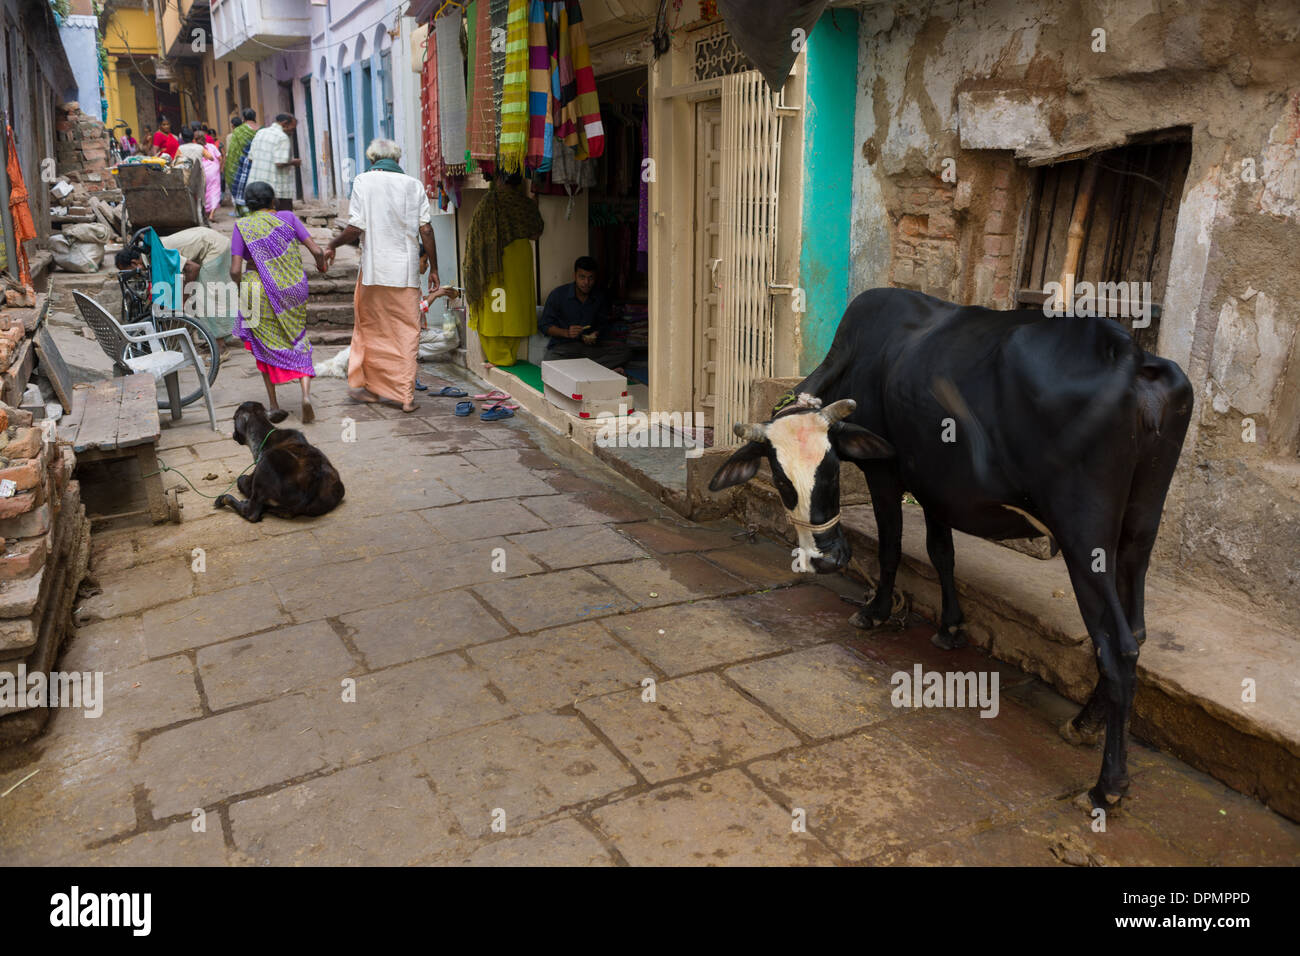 Cow in a crowded alleyway of the Old City of Varanasi, Uttar Pradesh, India Stock Photo